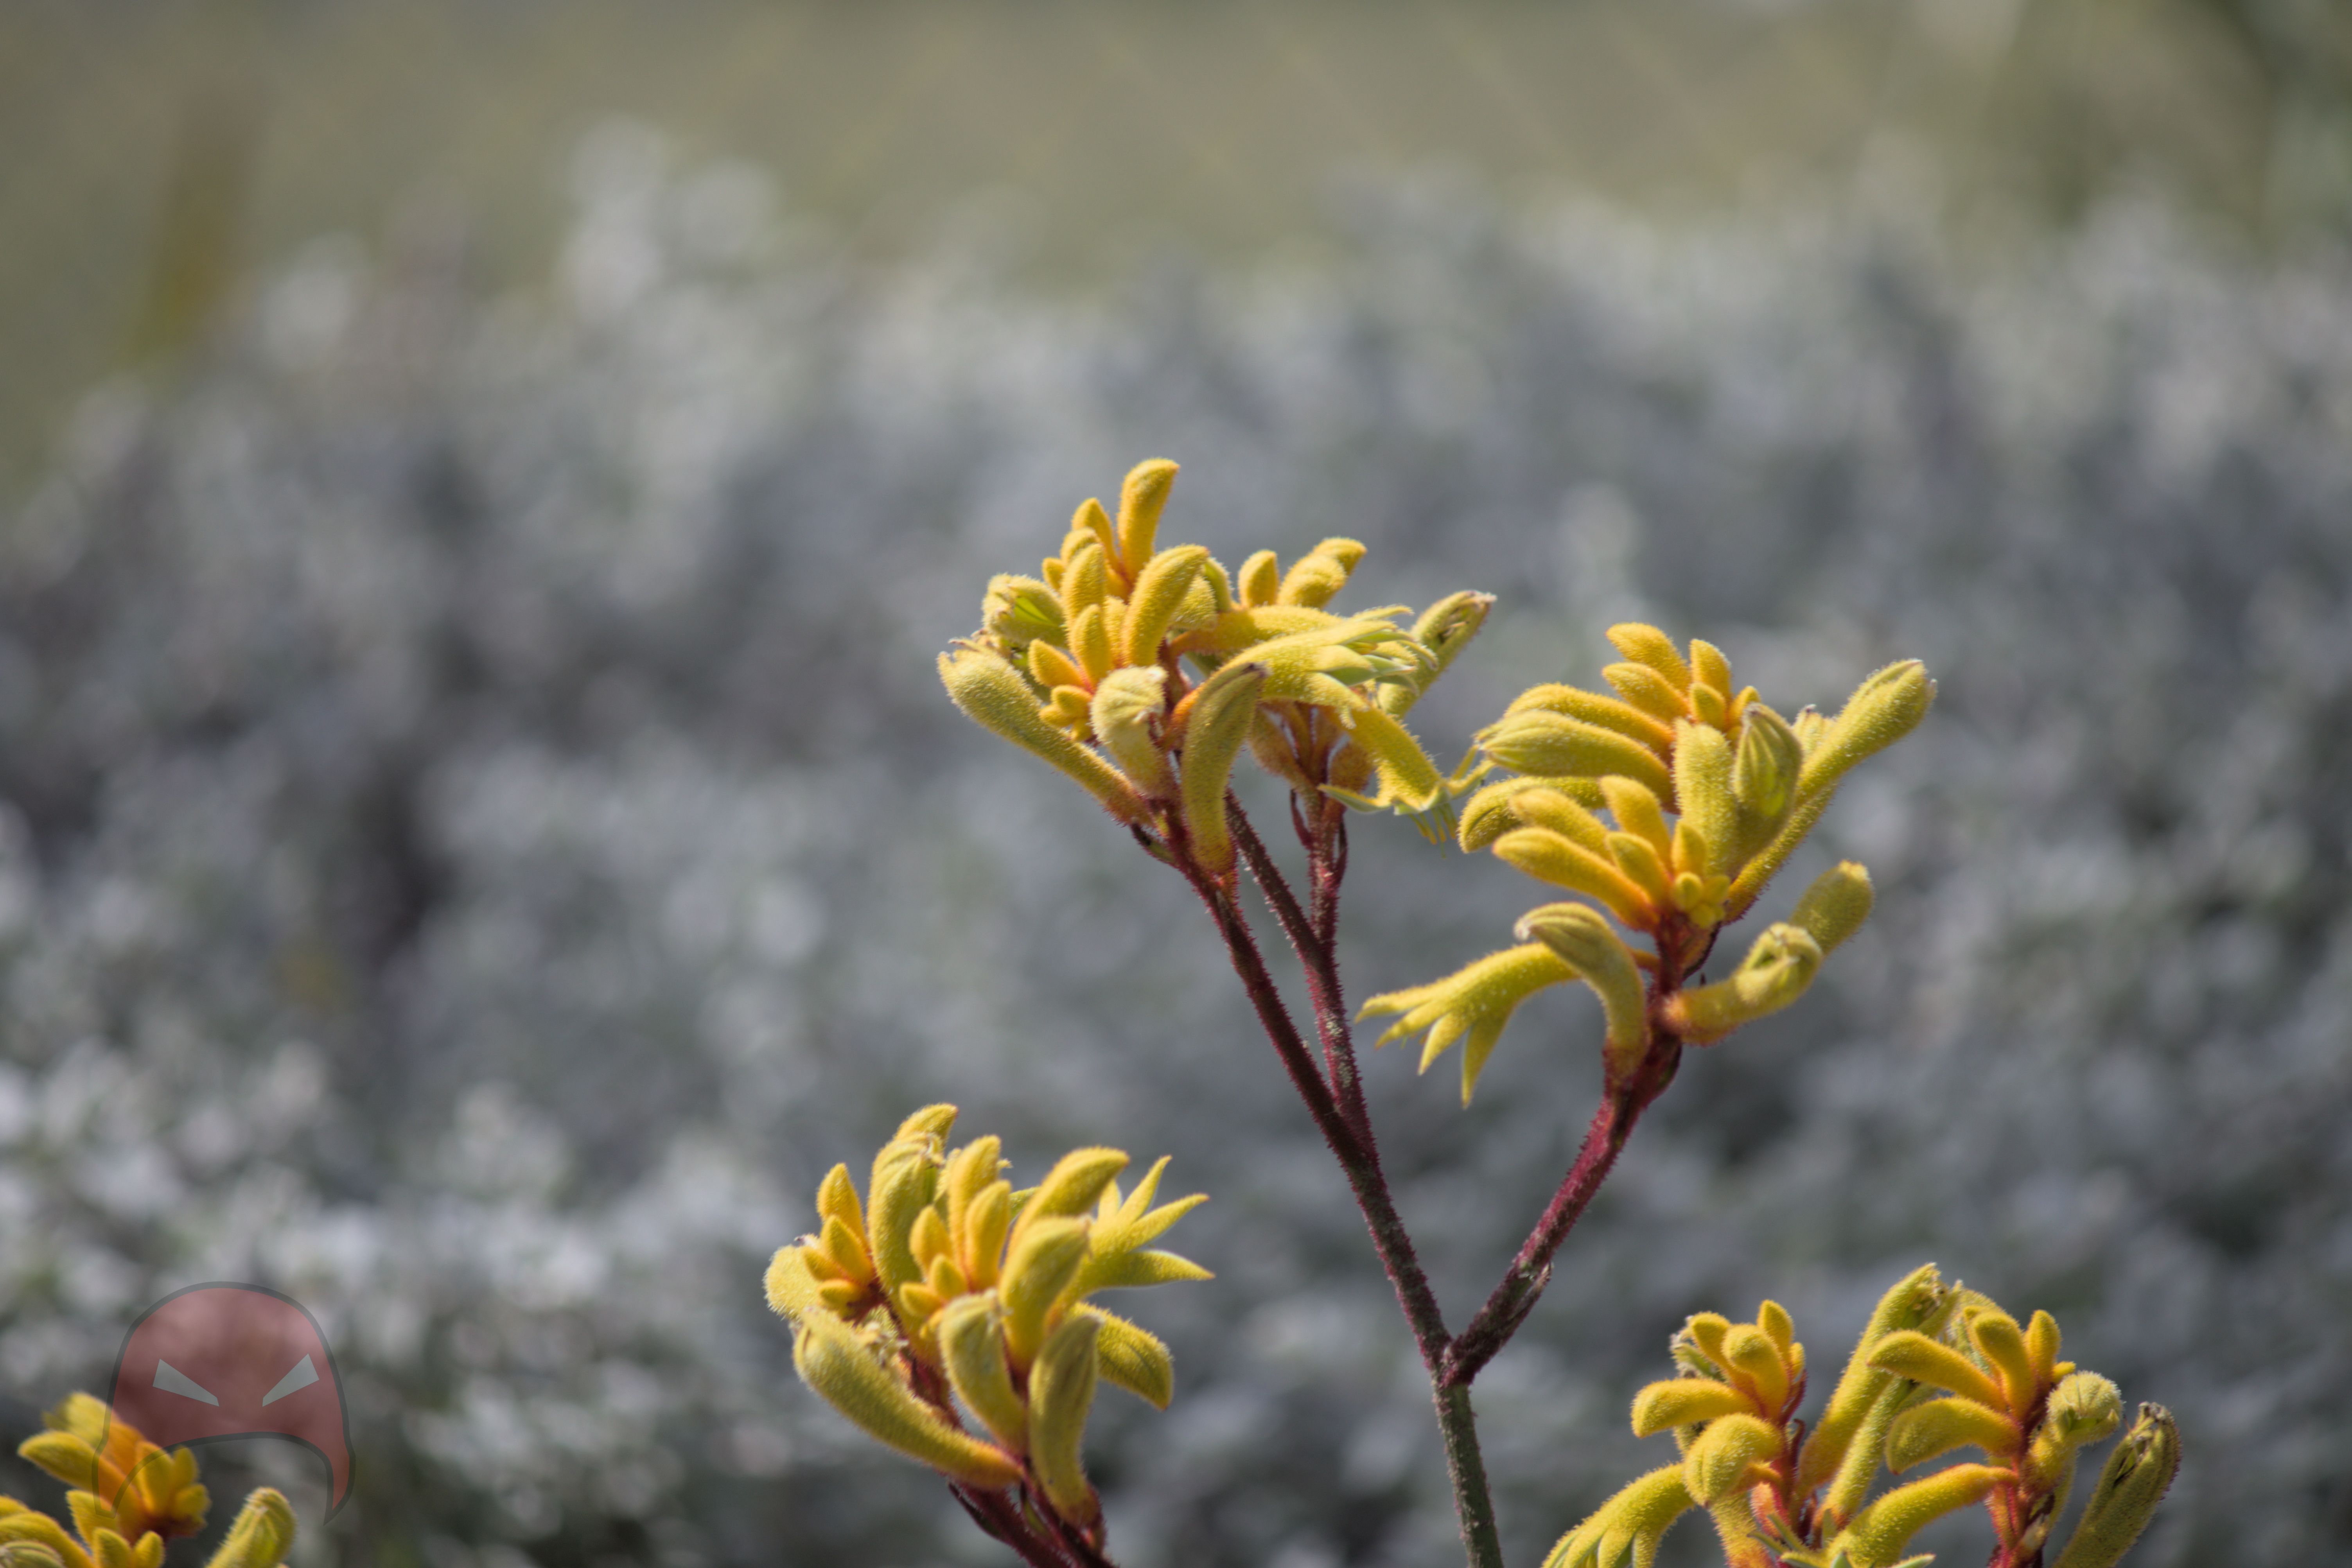 Several bunches of bright yellow Kangaroo Paw flowers  sit against a background of grey ground cover